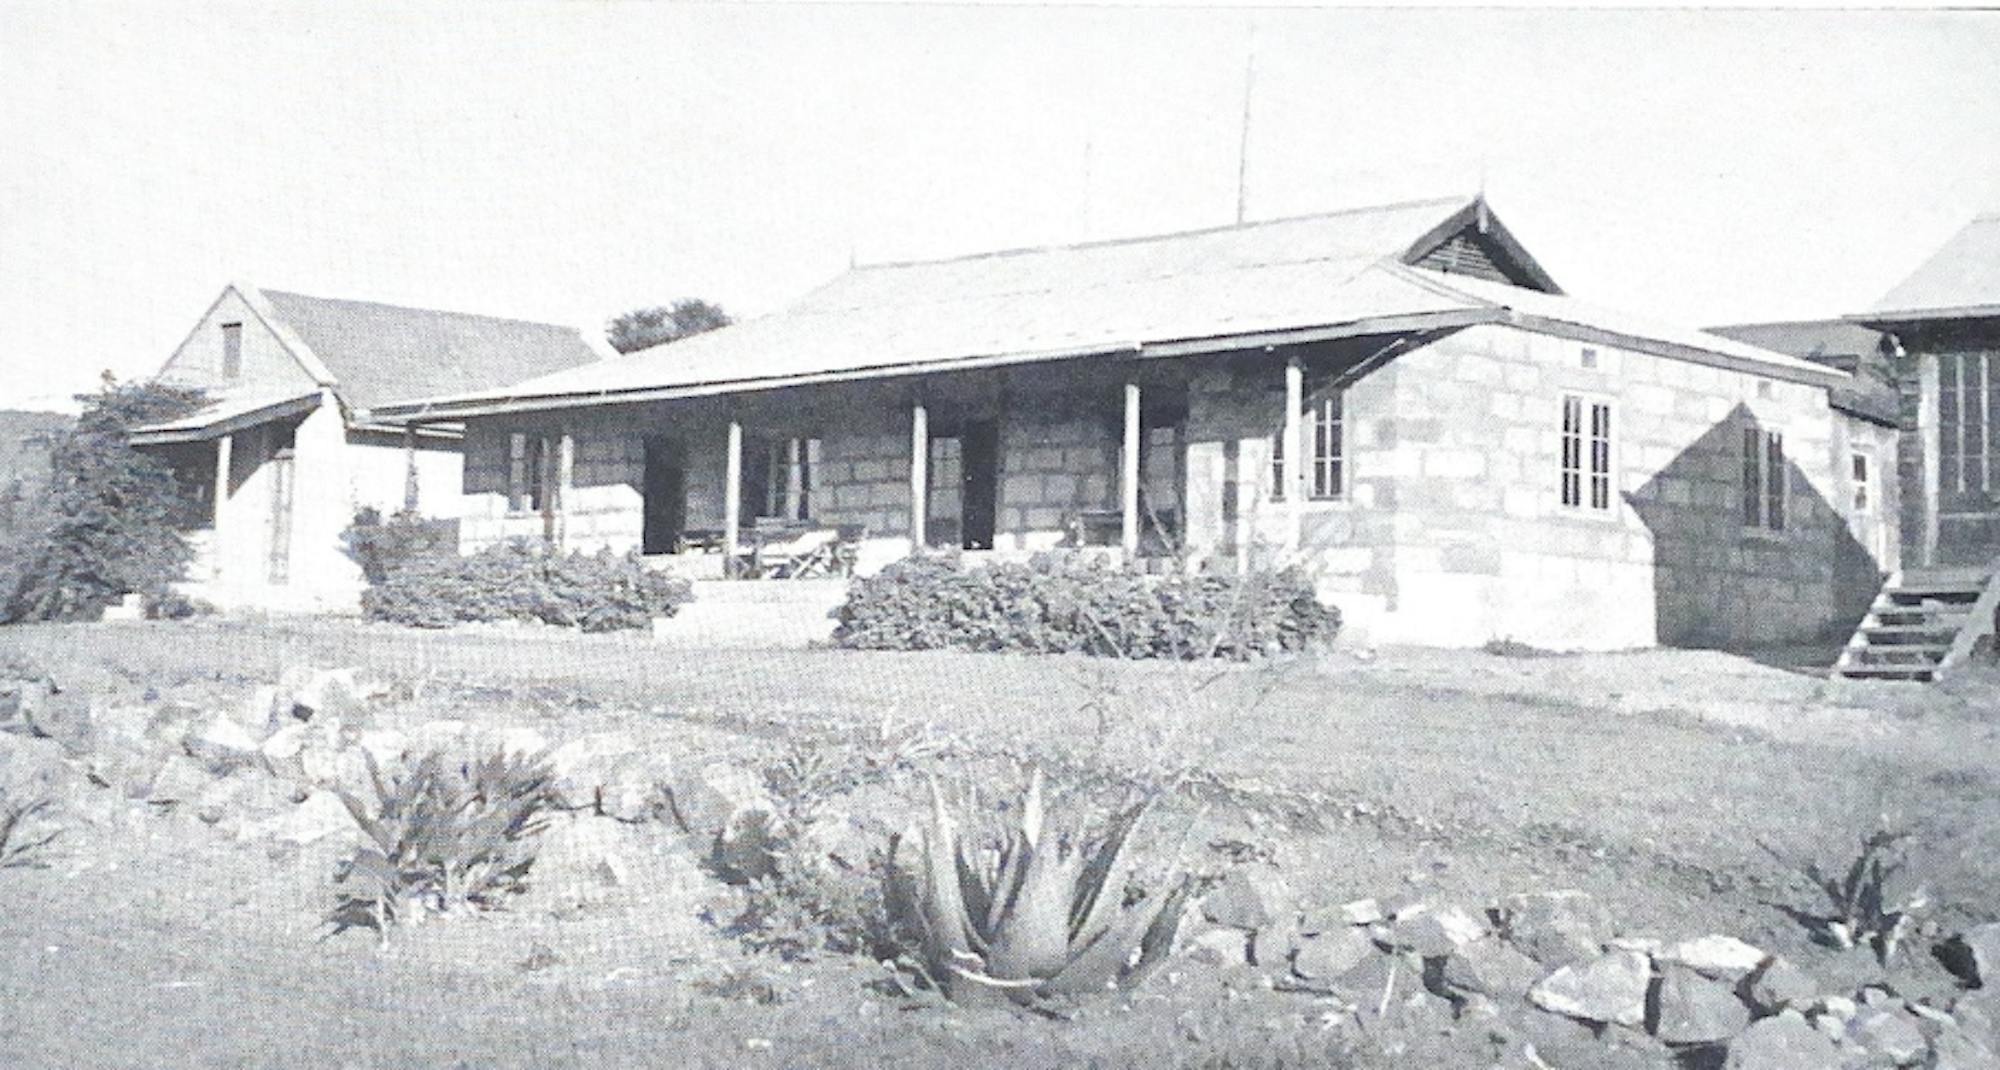 A black-and-white photo of the colonial-style ranch house.